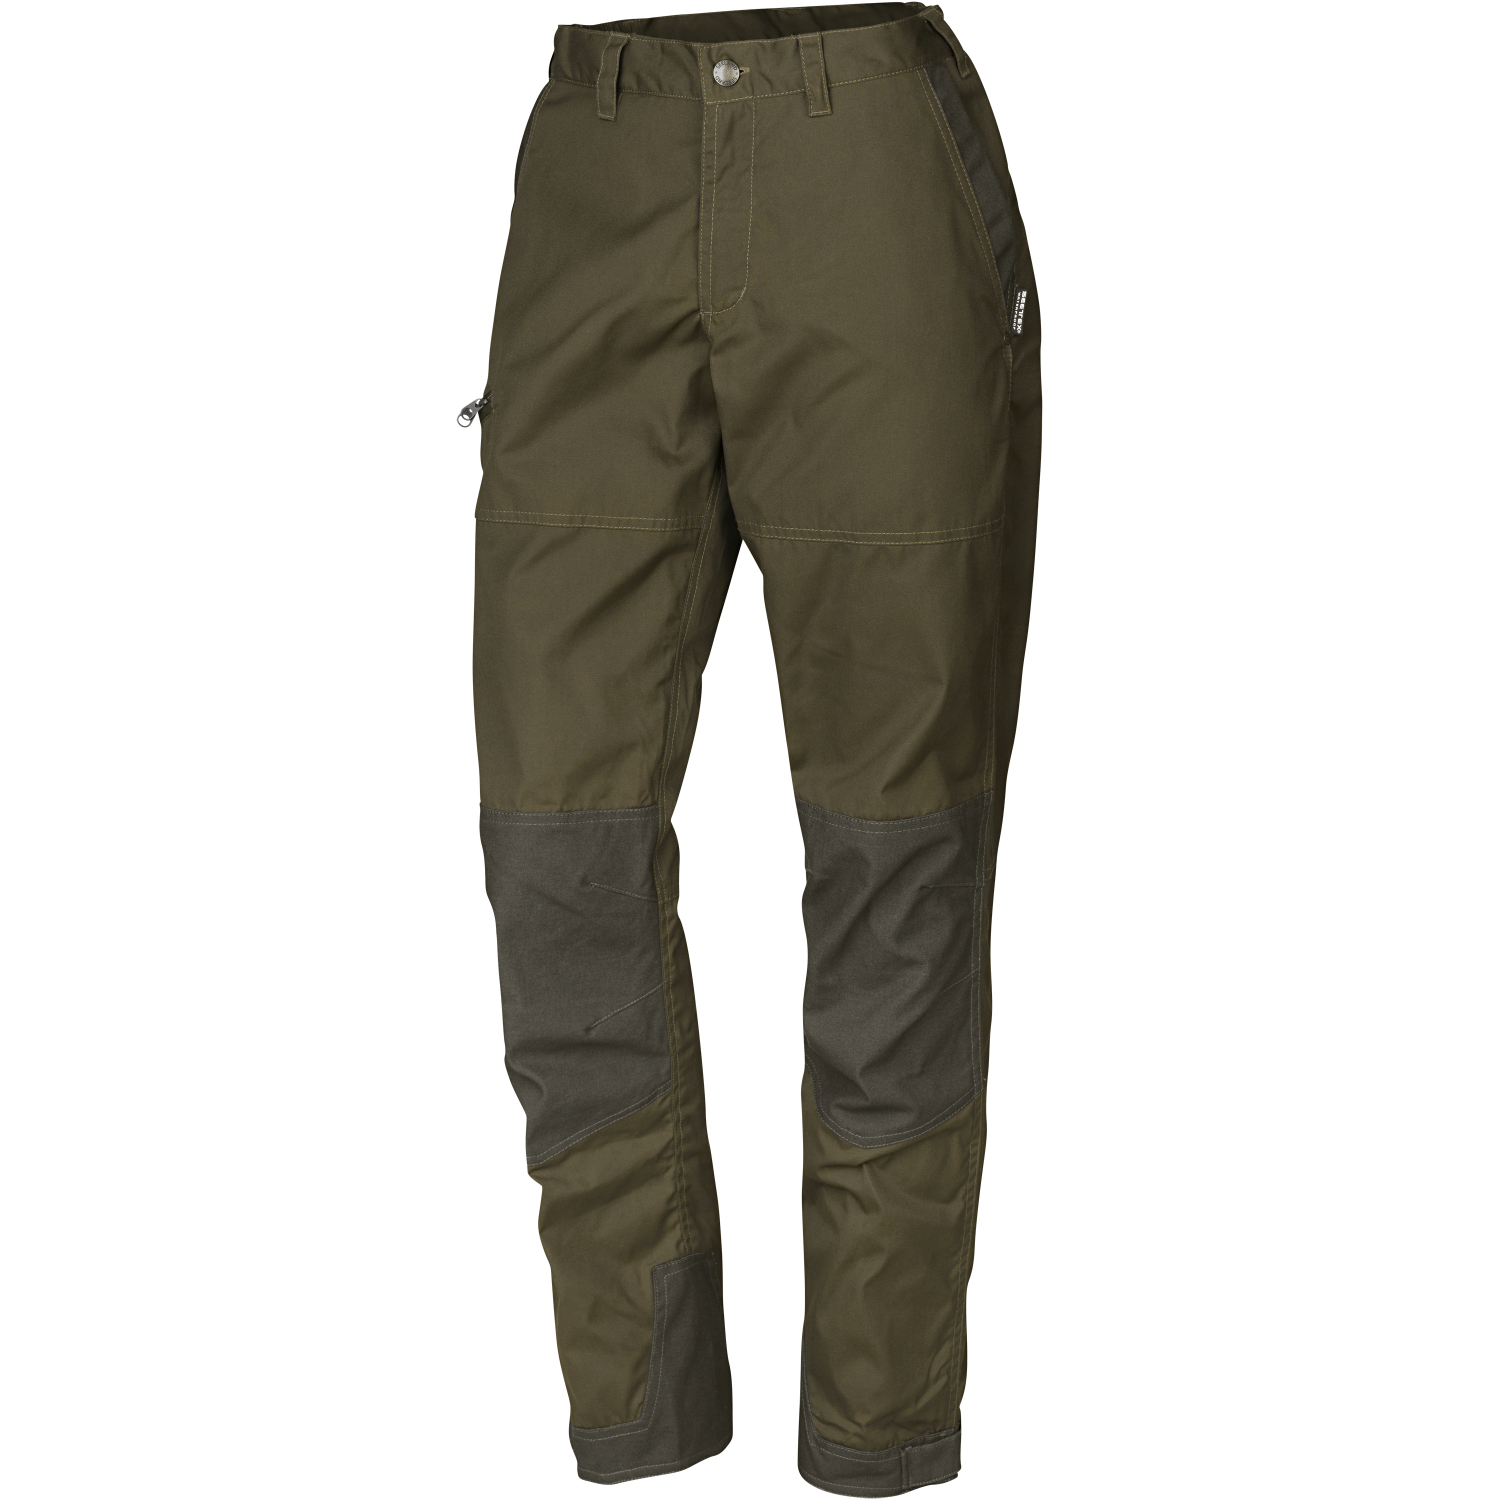 Seeland Womens Trousers Key-Point Reinforced at low prices